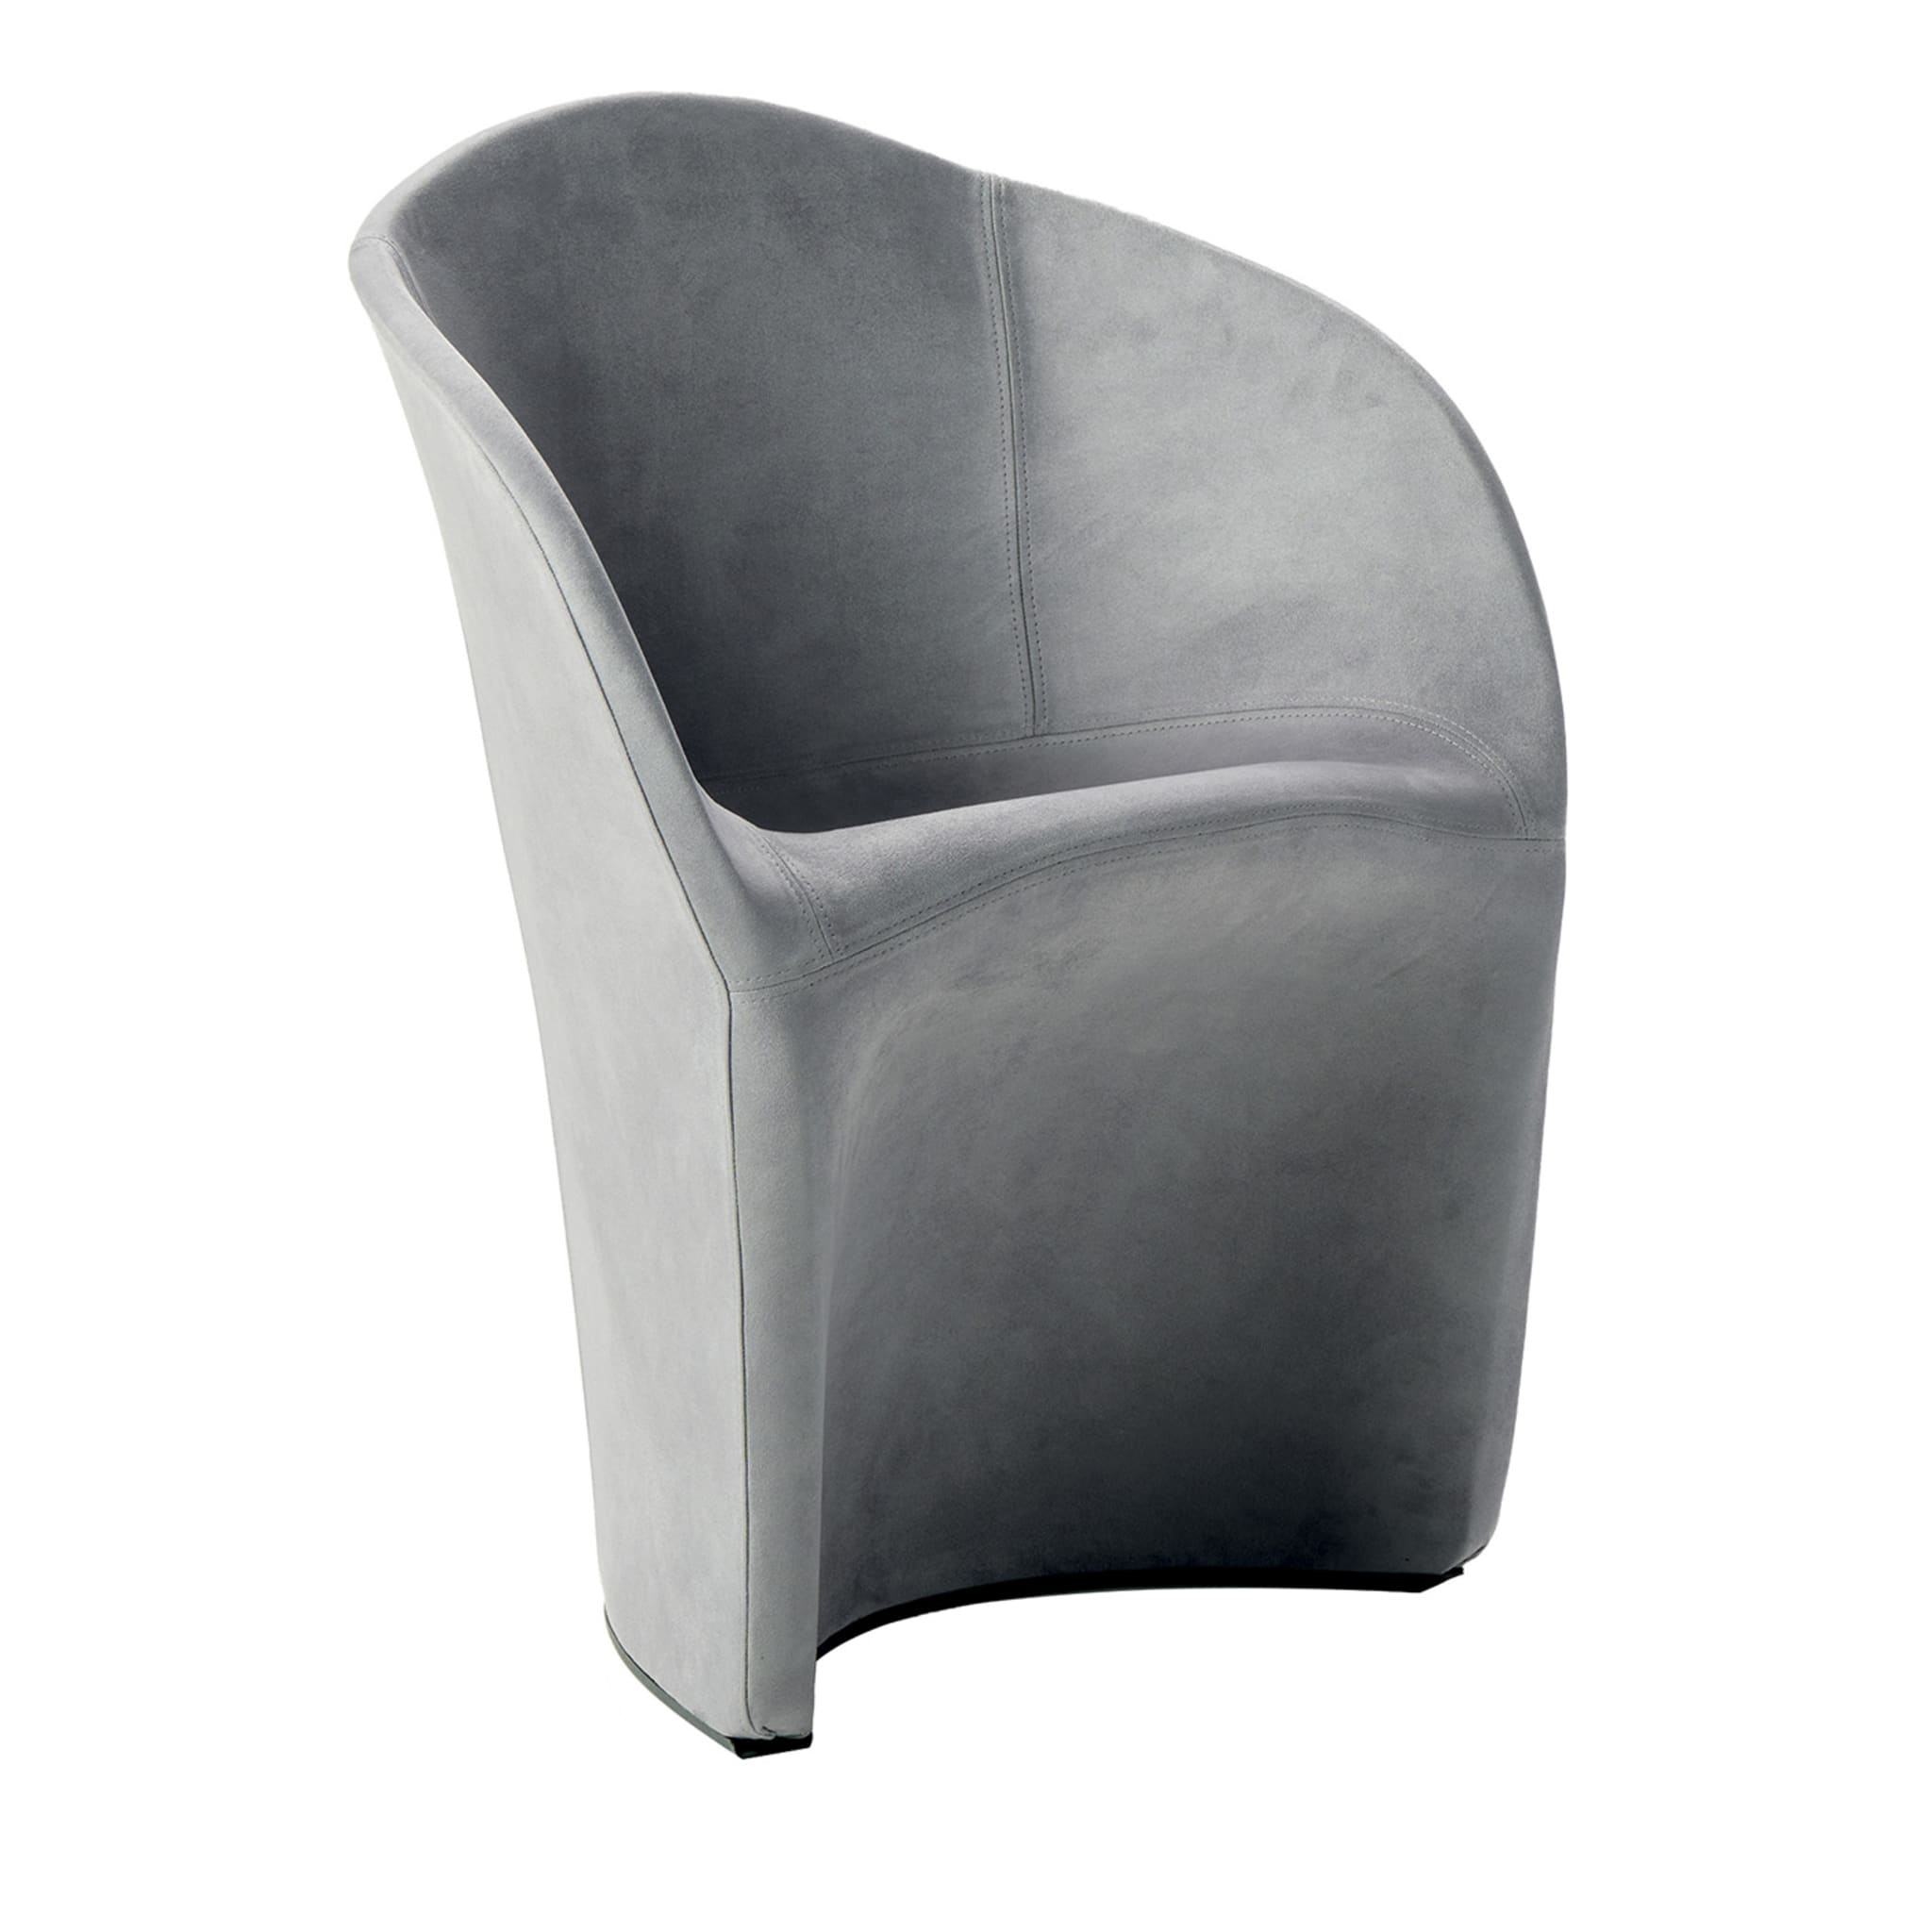 Layer Gray Armchair by Franco Poli - Main view